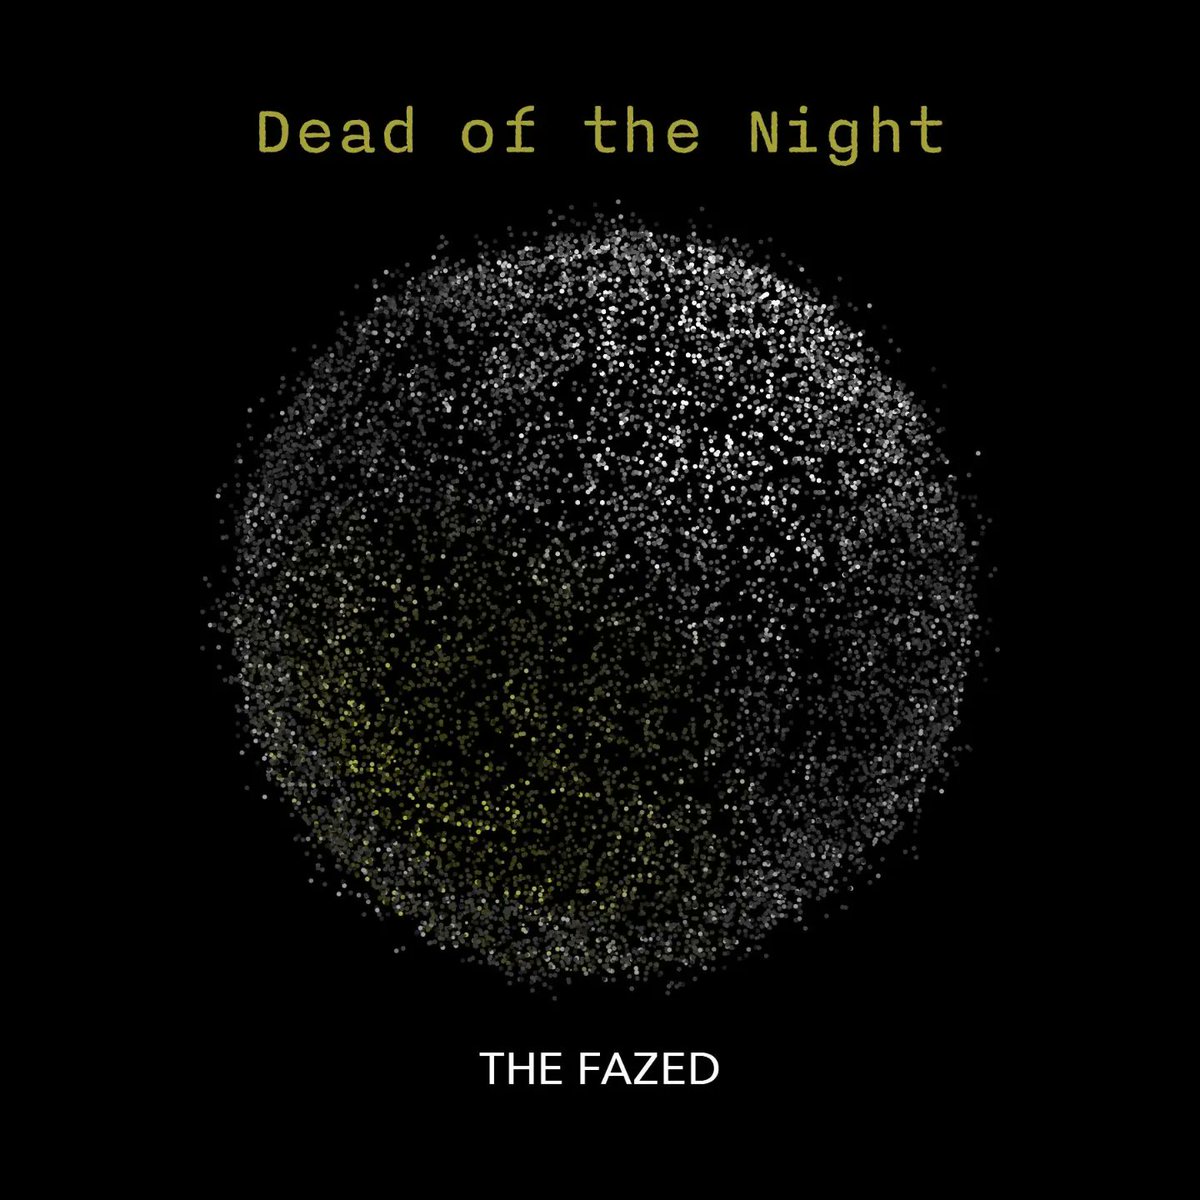 OUT NOW! DEAD OF THE NIGHT - The Fazed On all major platforms (Spotify, Amazon Music, Apple Music, iTunes) Mixed and mastered by Adam Ellis - Deadline Studios  Video: Marc Hamill - Roasted Productions #NewMusic open.spotify.com/album/5n25ns2R… youtu.be/LISETKRe0WM?si…